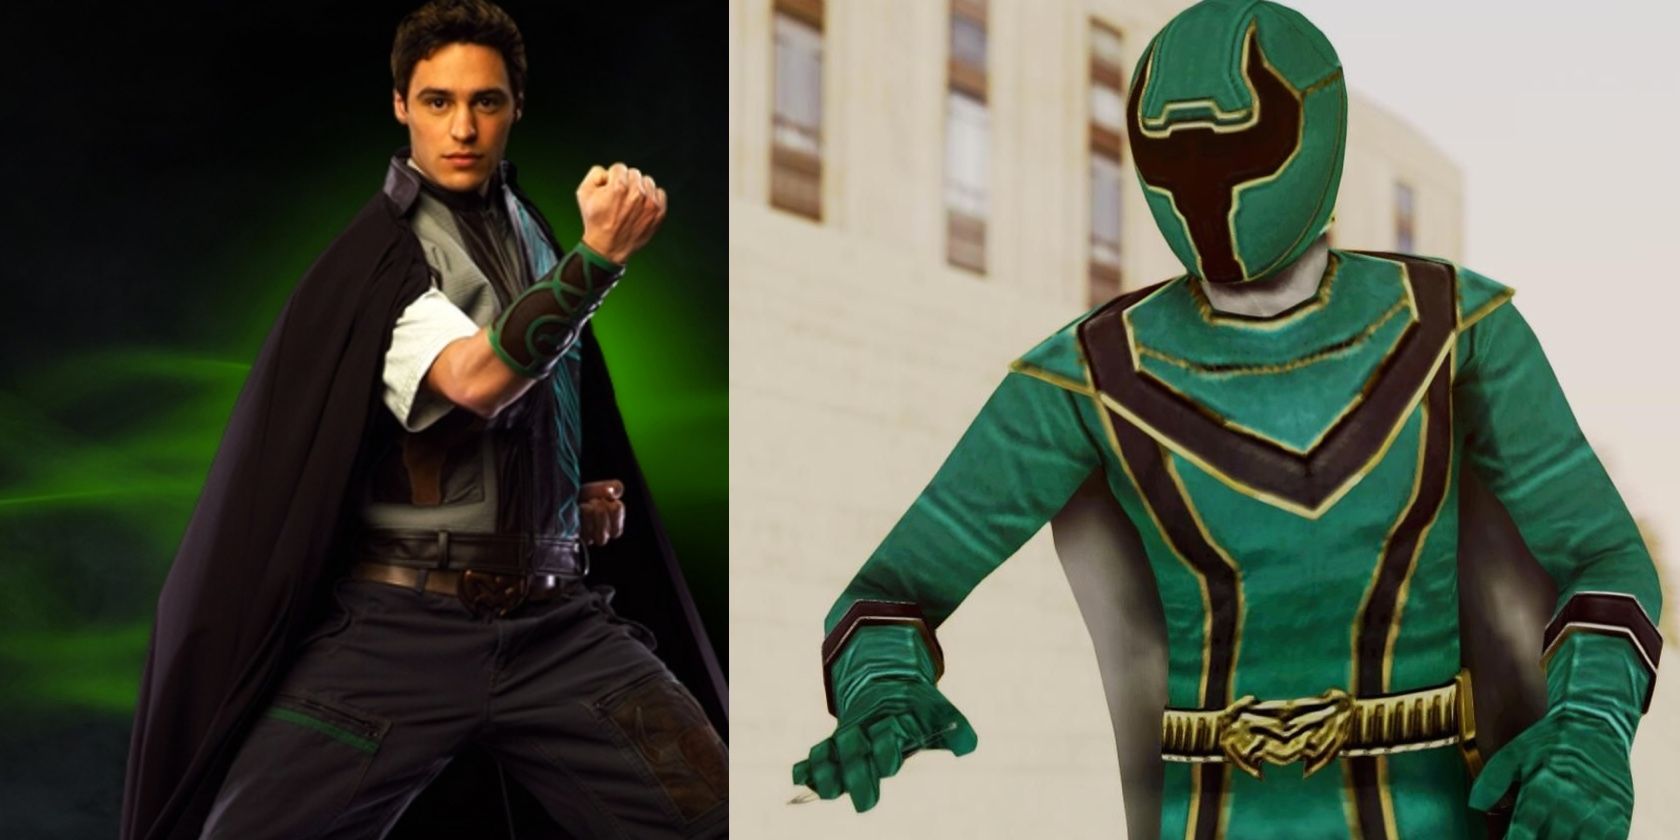 A split image of Xander as the Green Ranger in Power Rangers Mystic Force, in and out of his suit